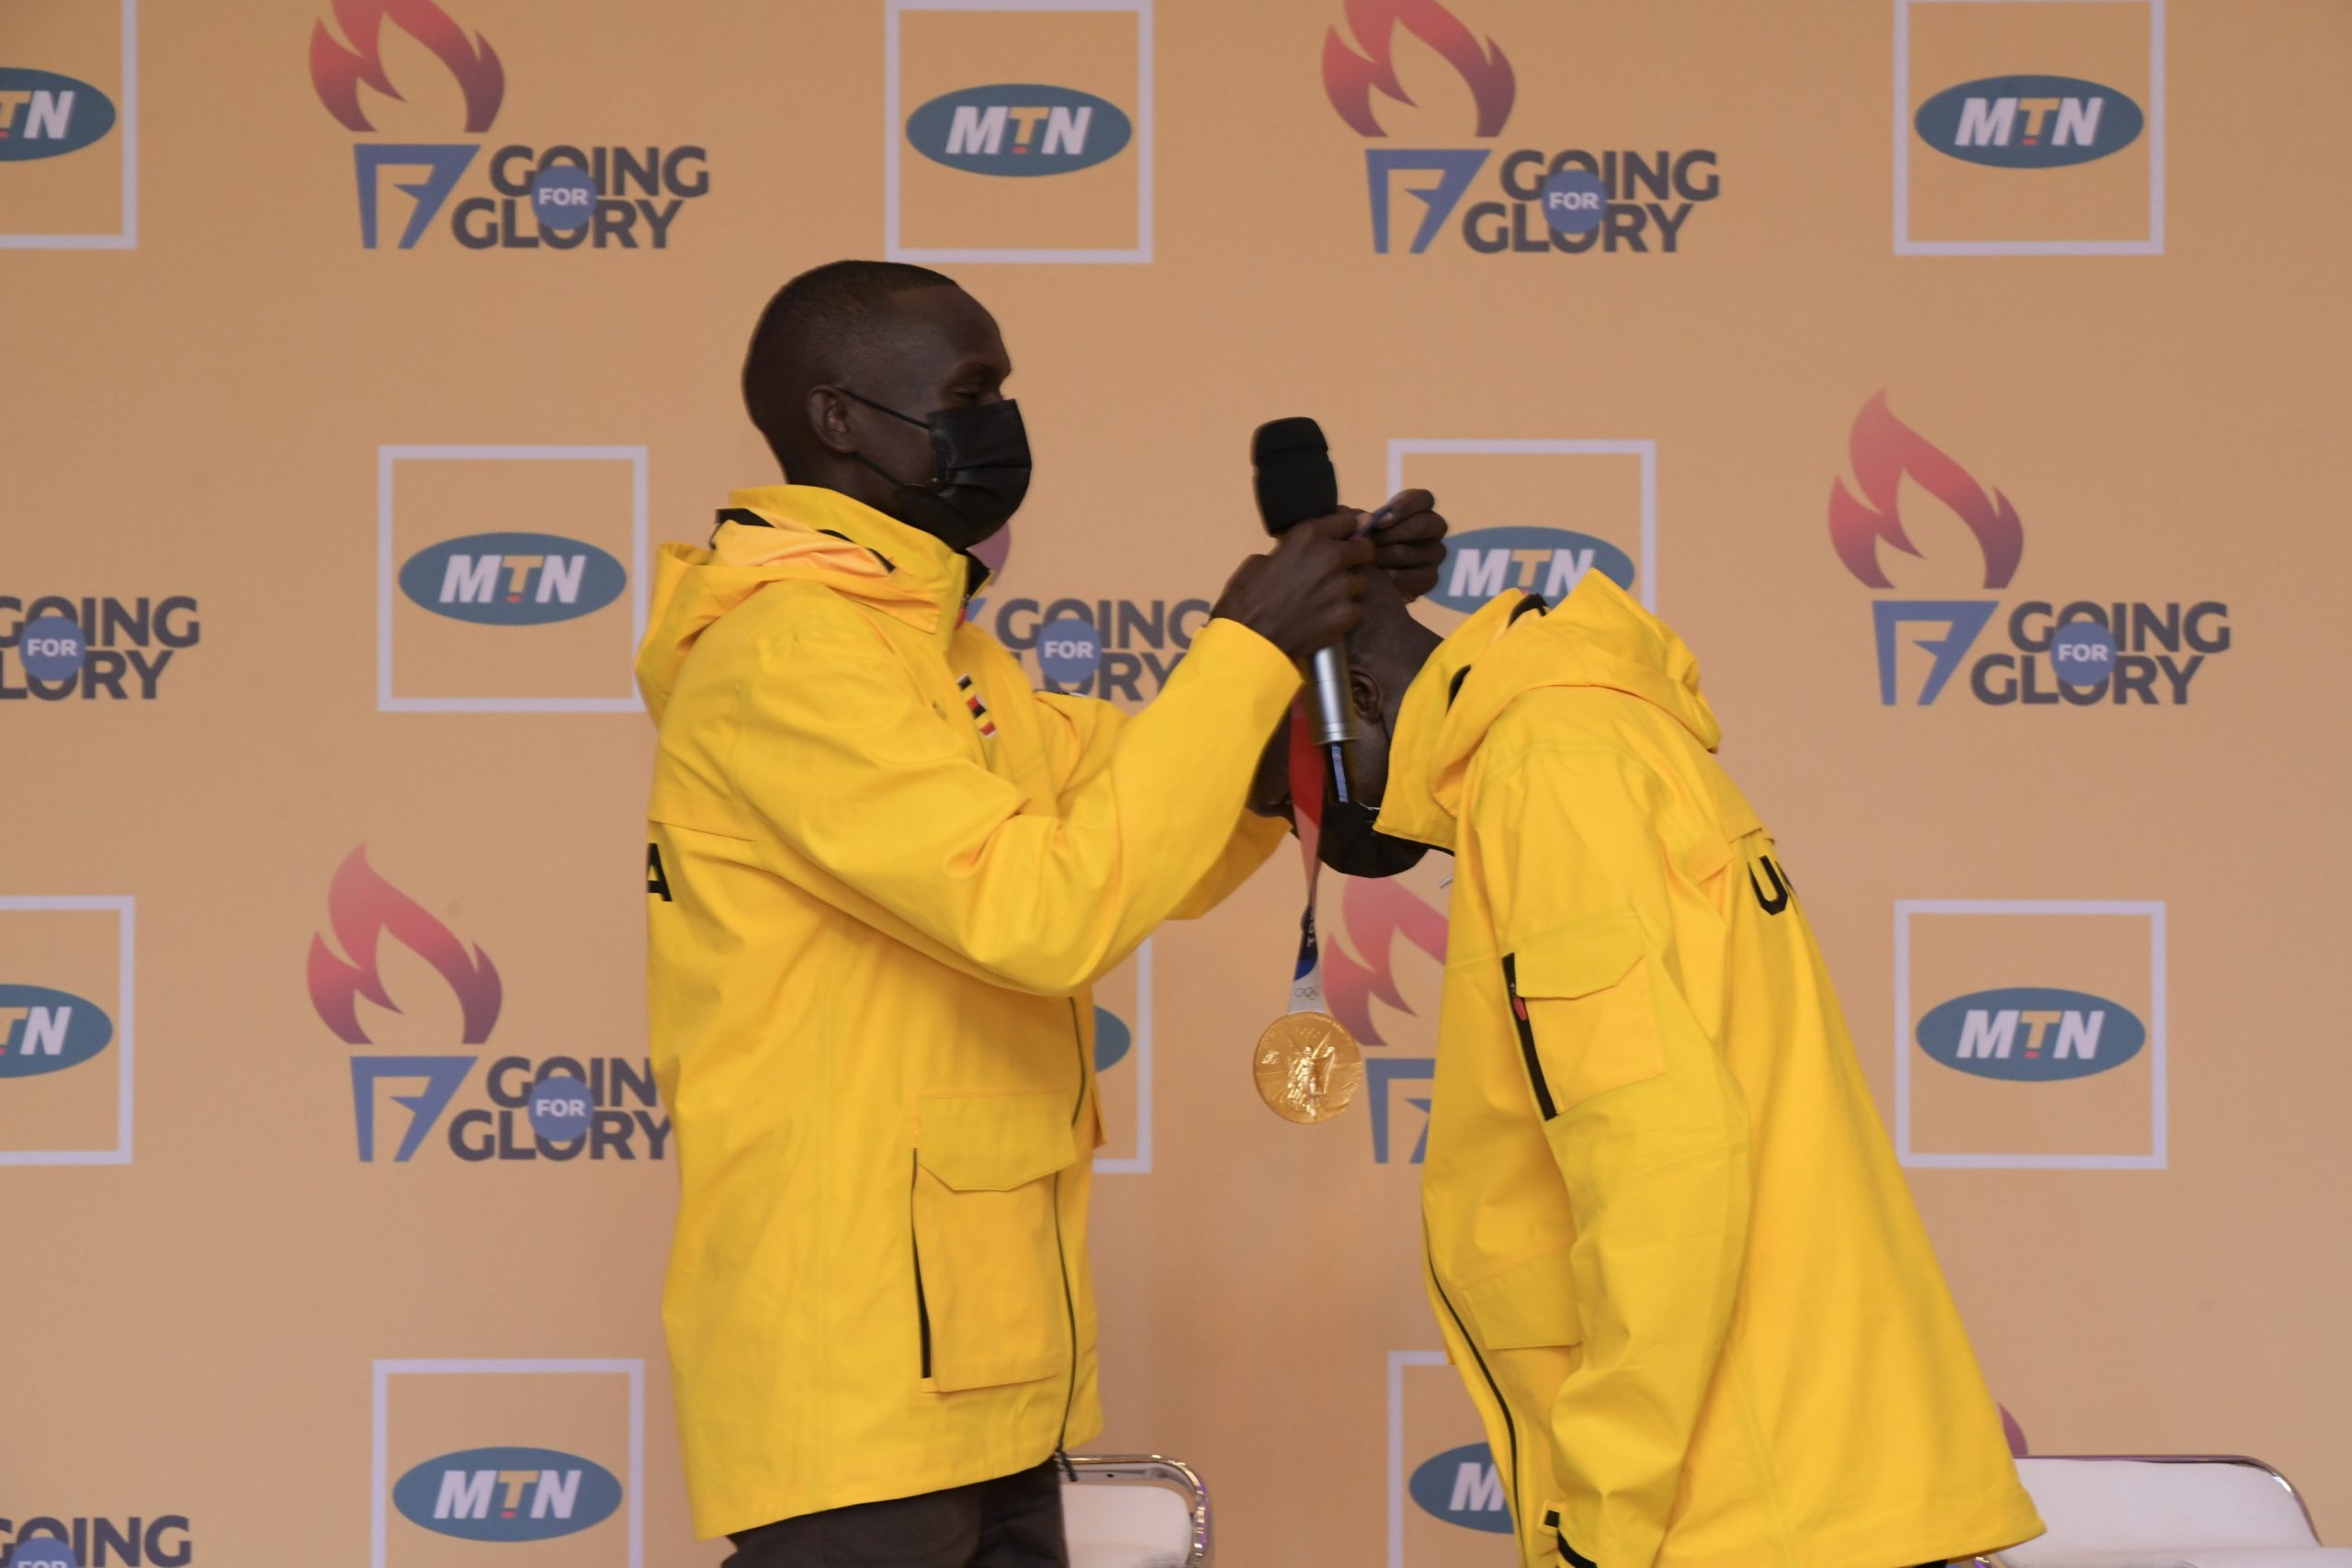 Cheptegei Gives Away One Olympic Medal to Kiprotich